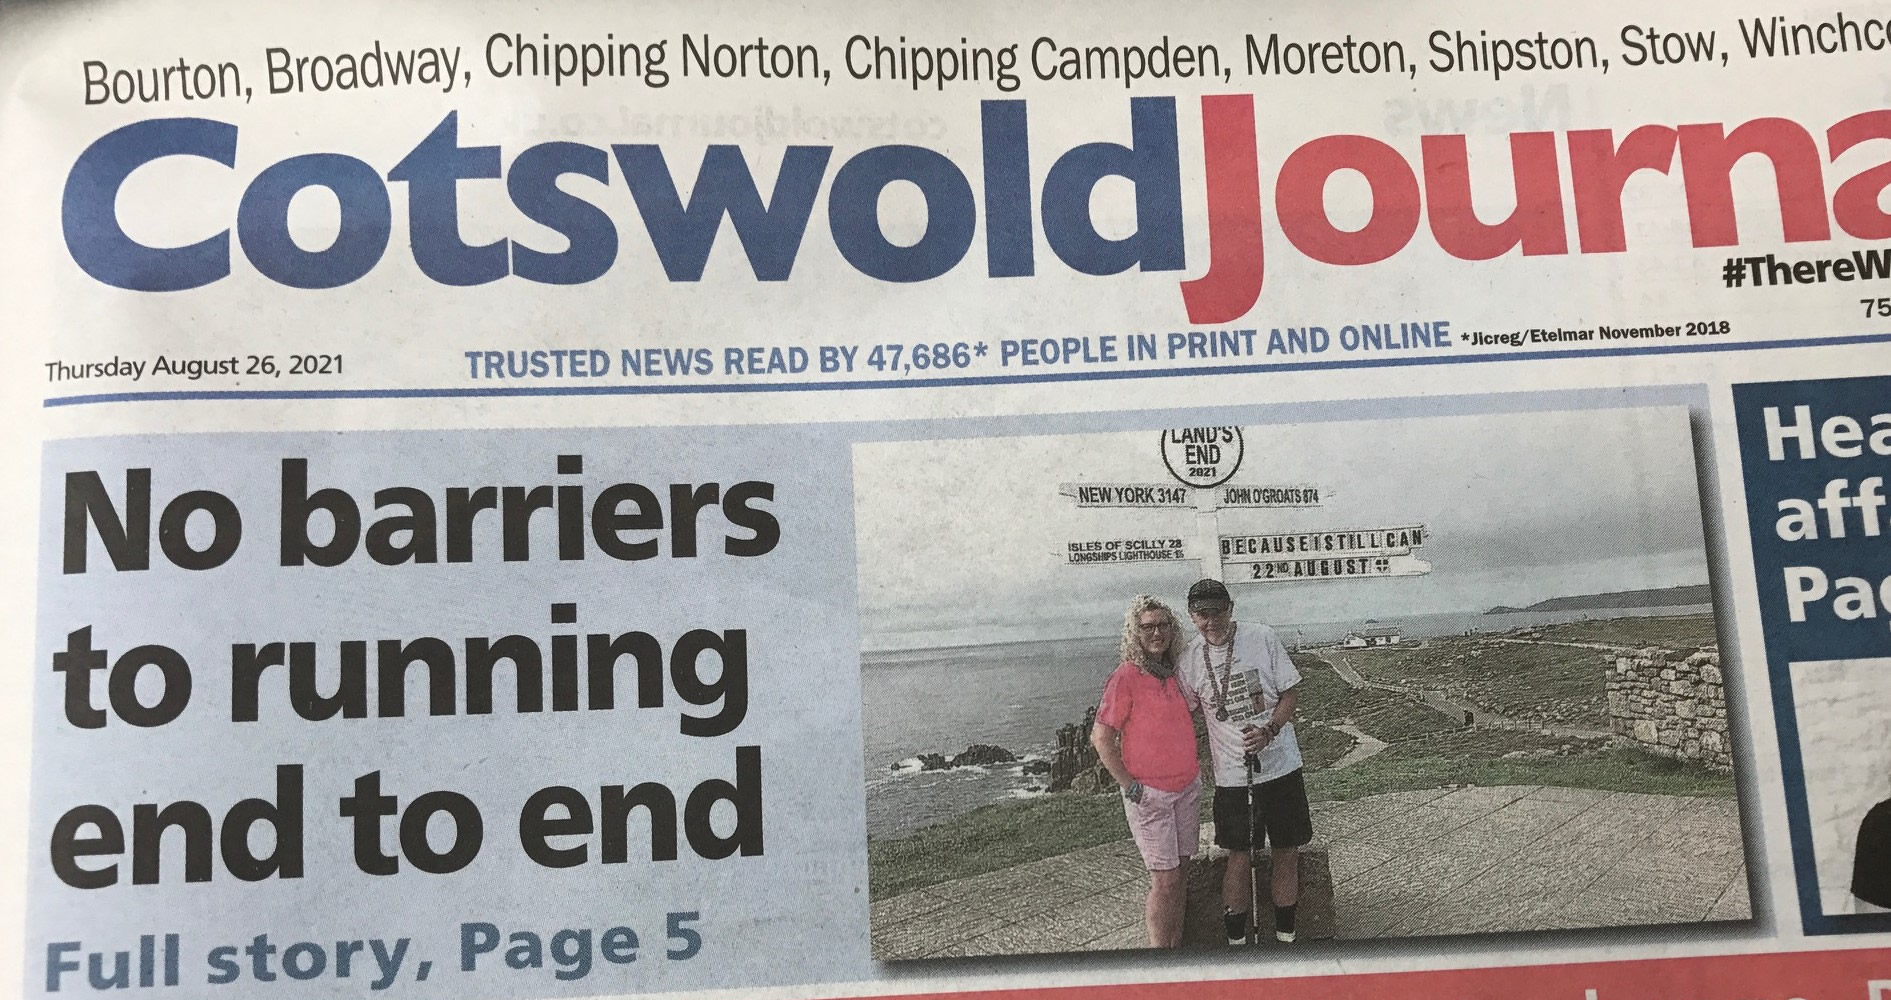 No barriers to running end to end - Cotswold Journal 26th August 2021